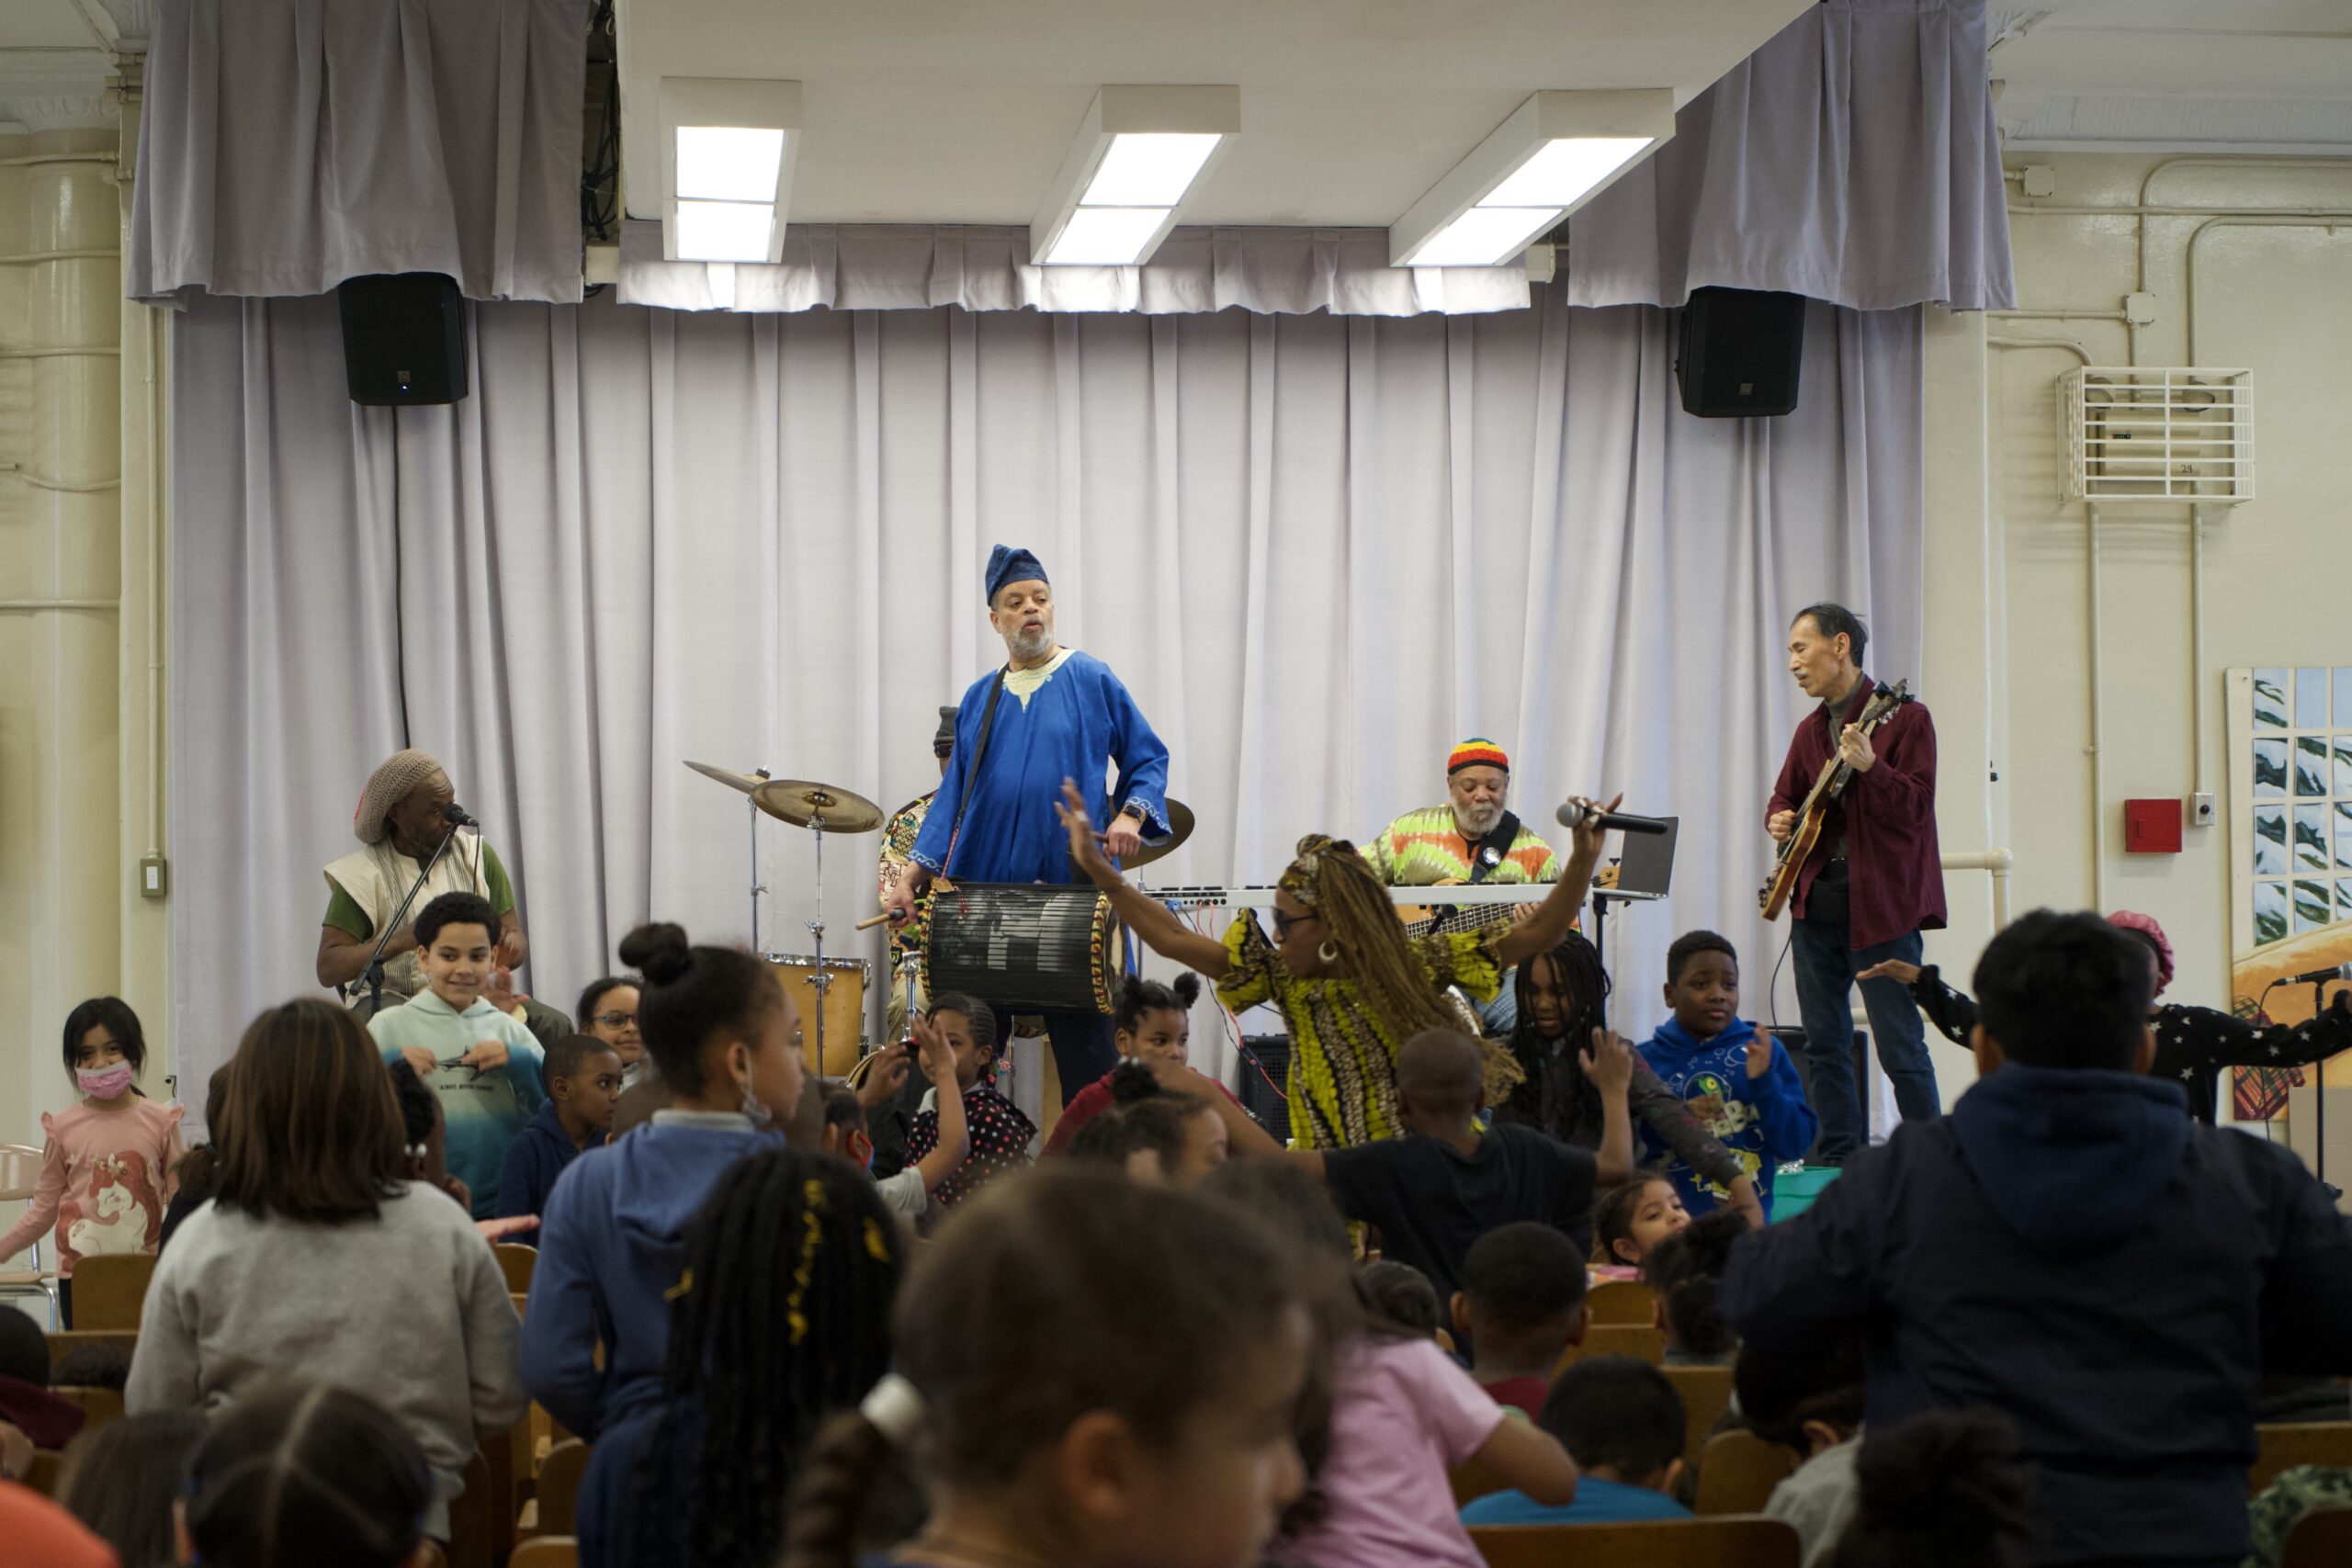 Baba Atiba's group Befo' Quotet Perform an assembly for P.S/M.S 4 in the Bronx.